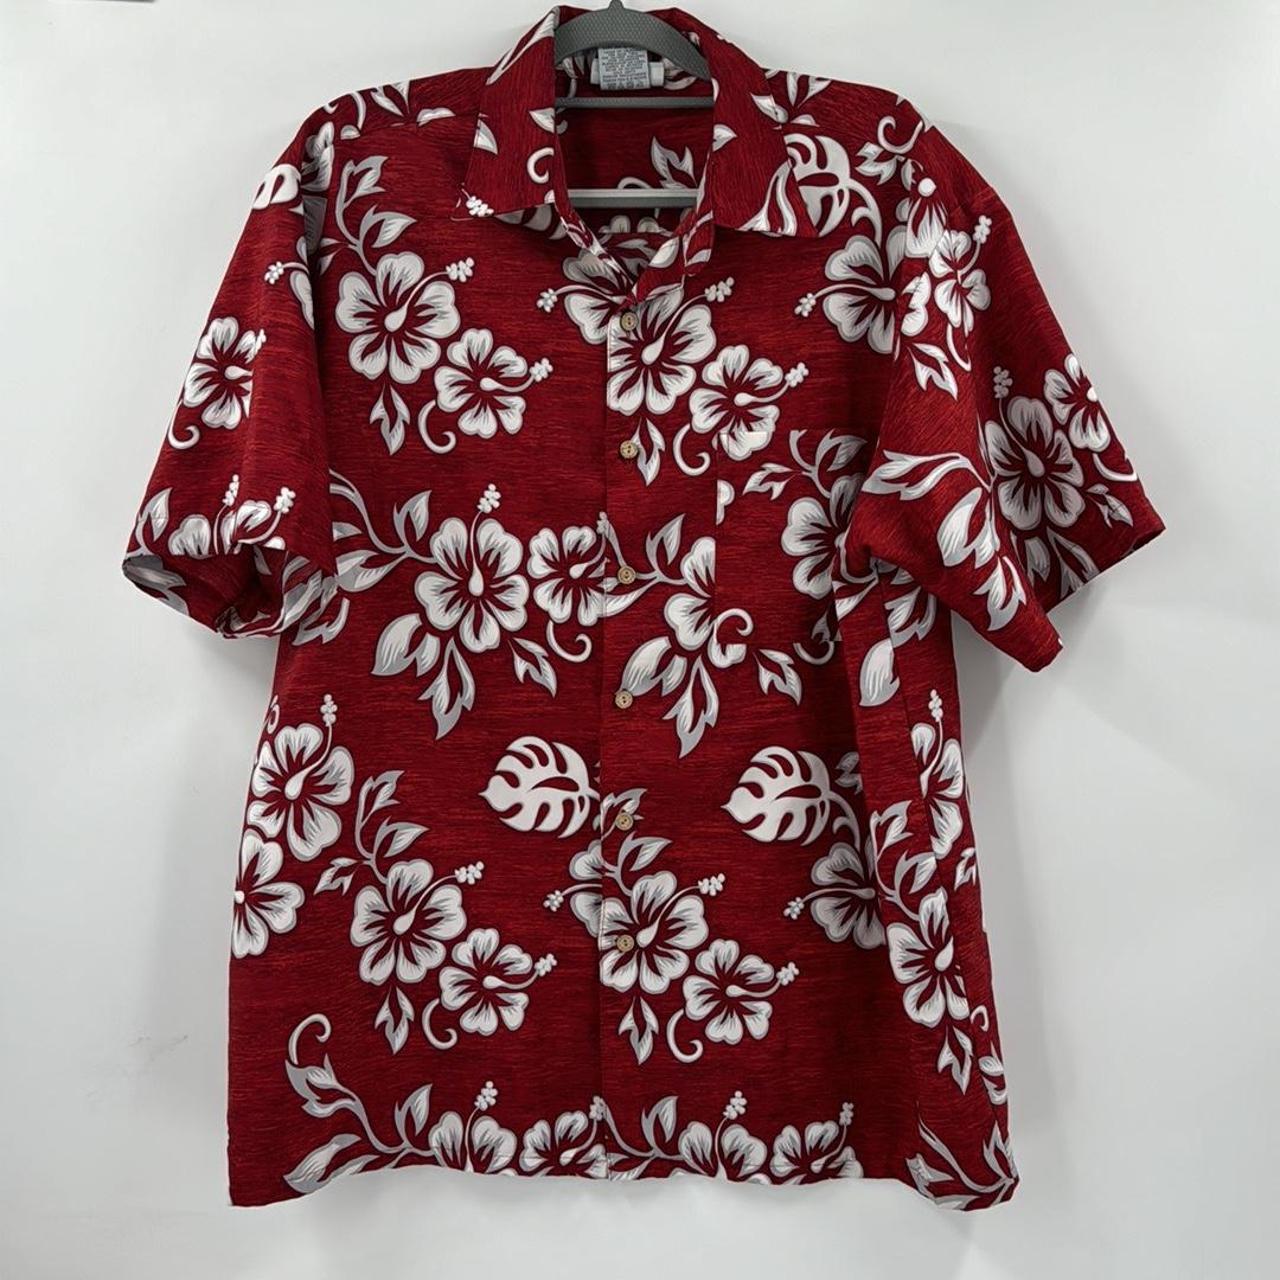 Extreme Fit Men's Red and White Shirt